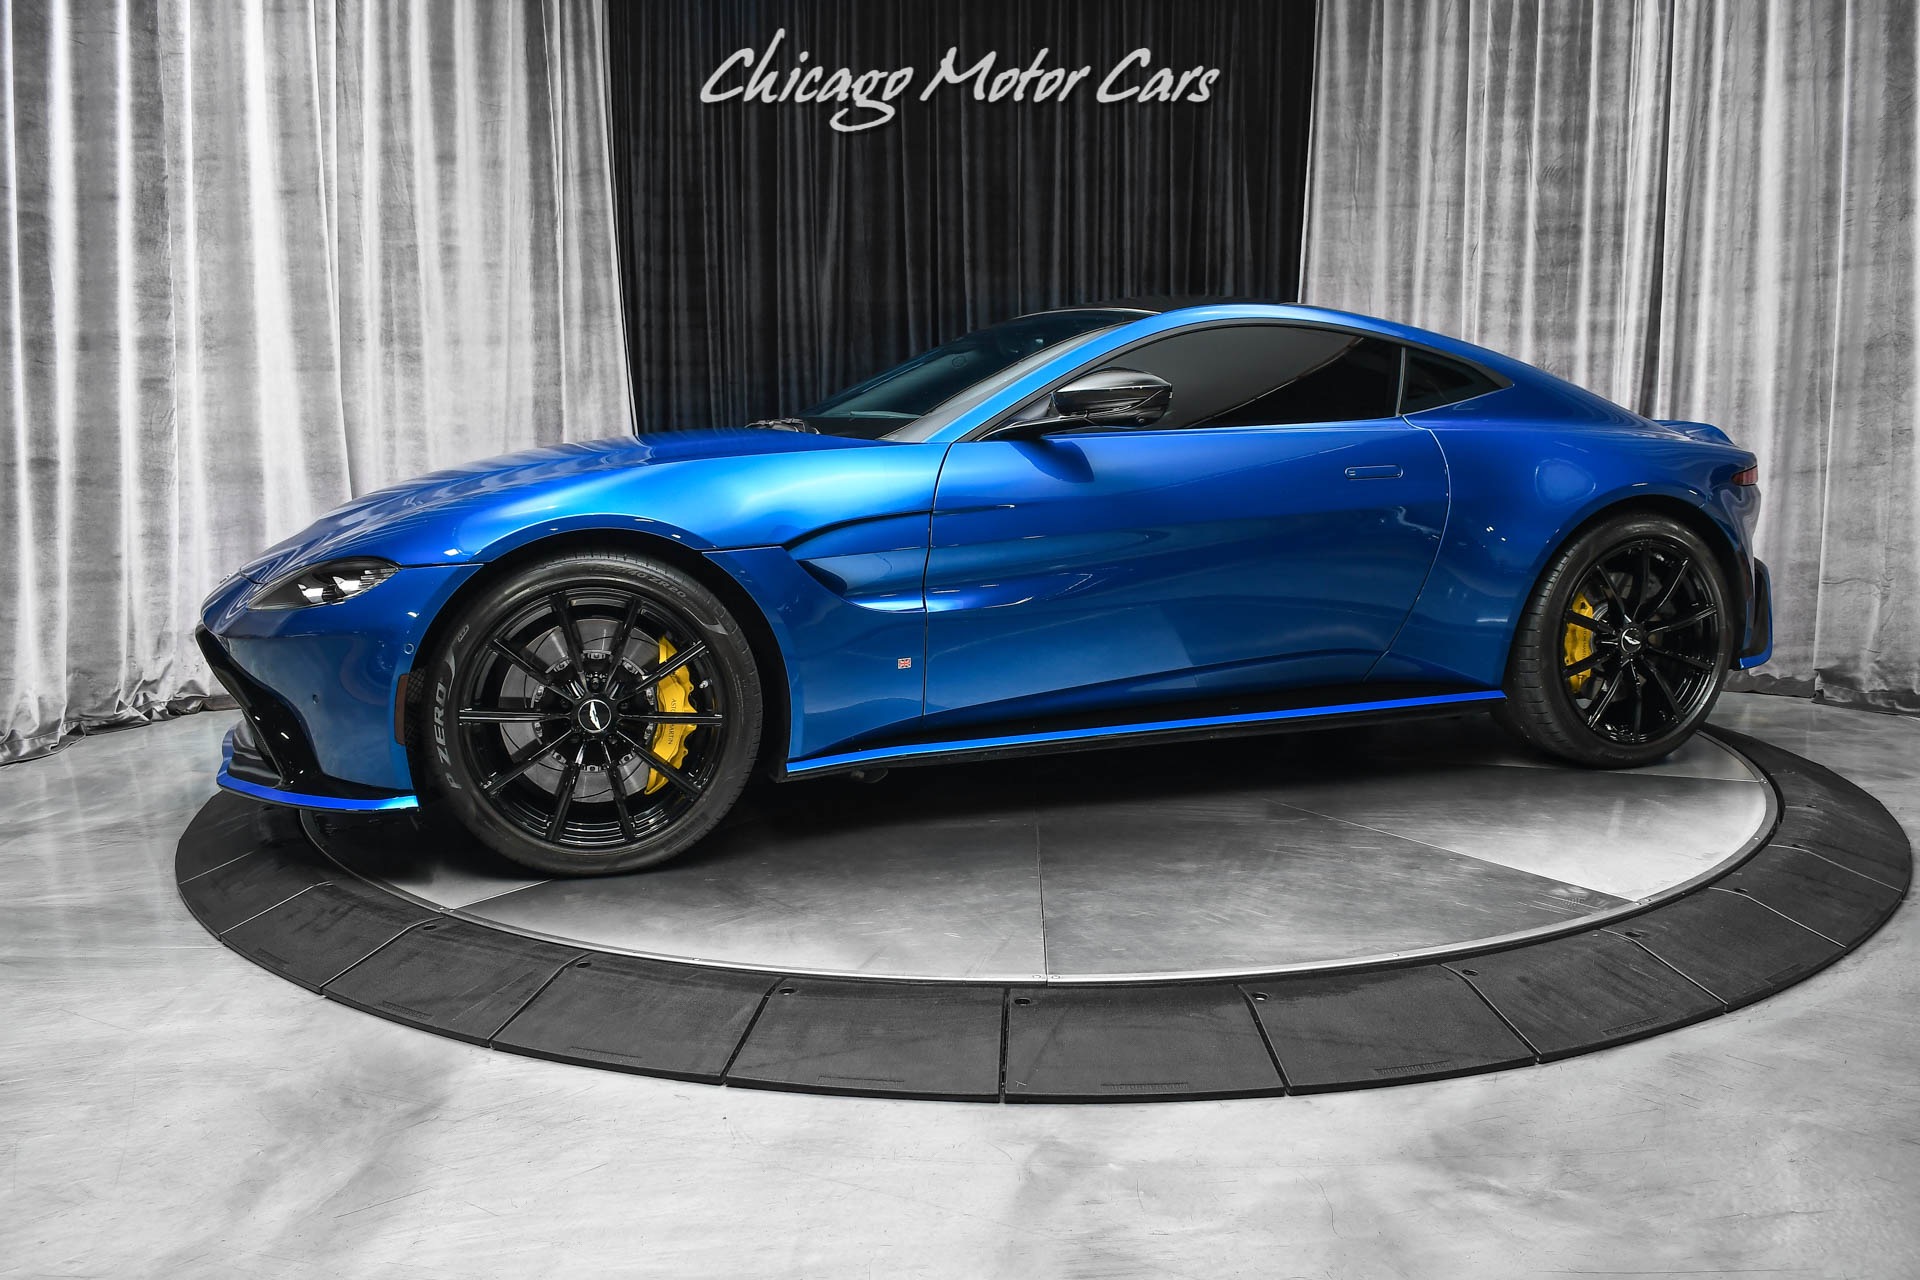 Used-2019-Aston-Martin-Vantage-Coupe-MSRP-190819-Hard-LOADED-Serviced-MING-BLUE